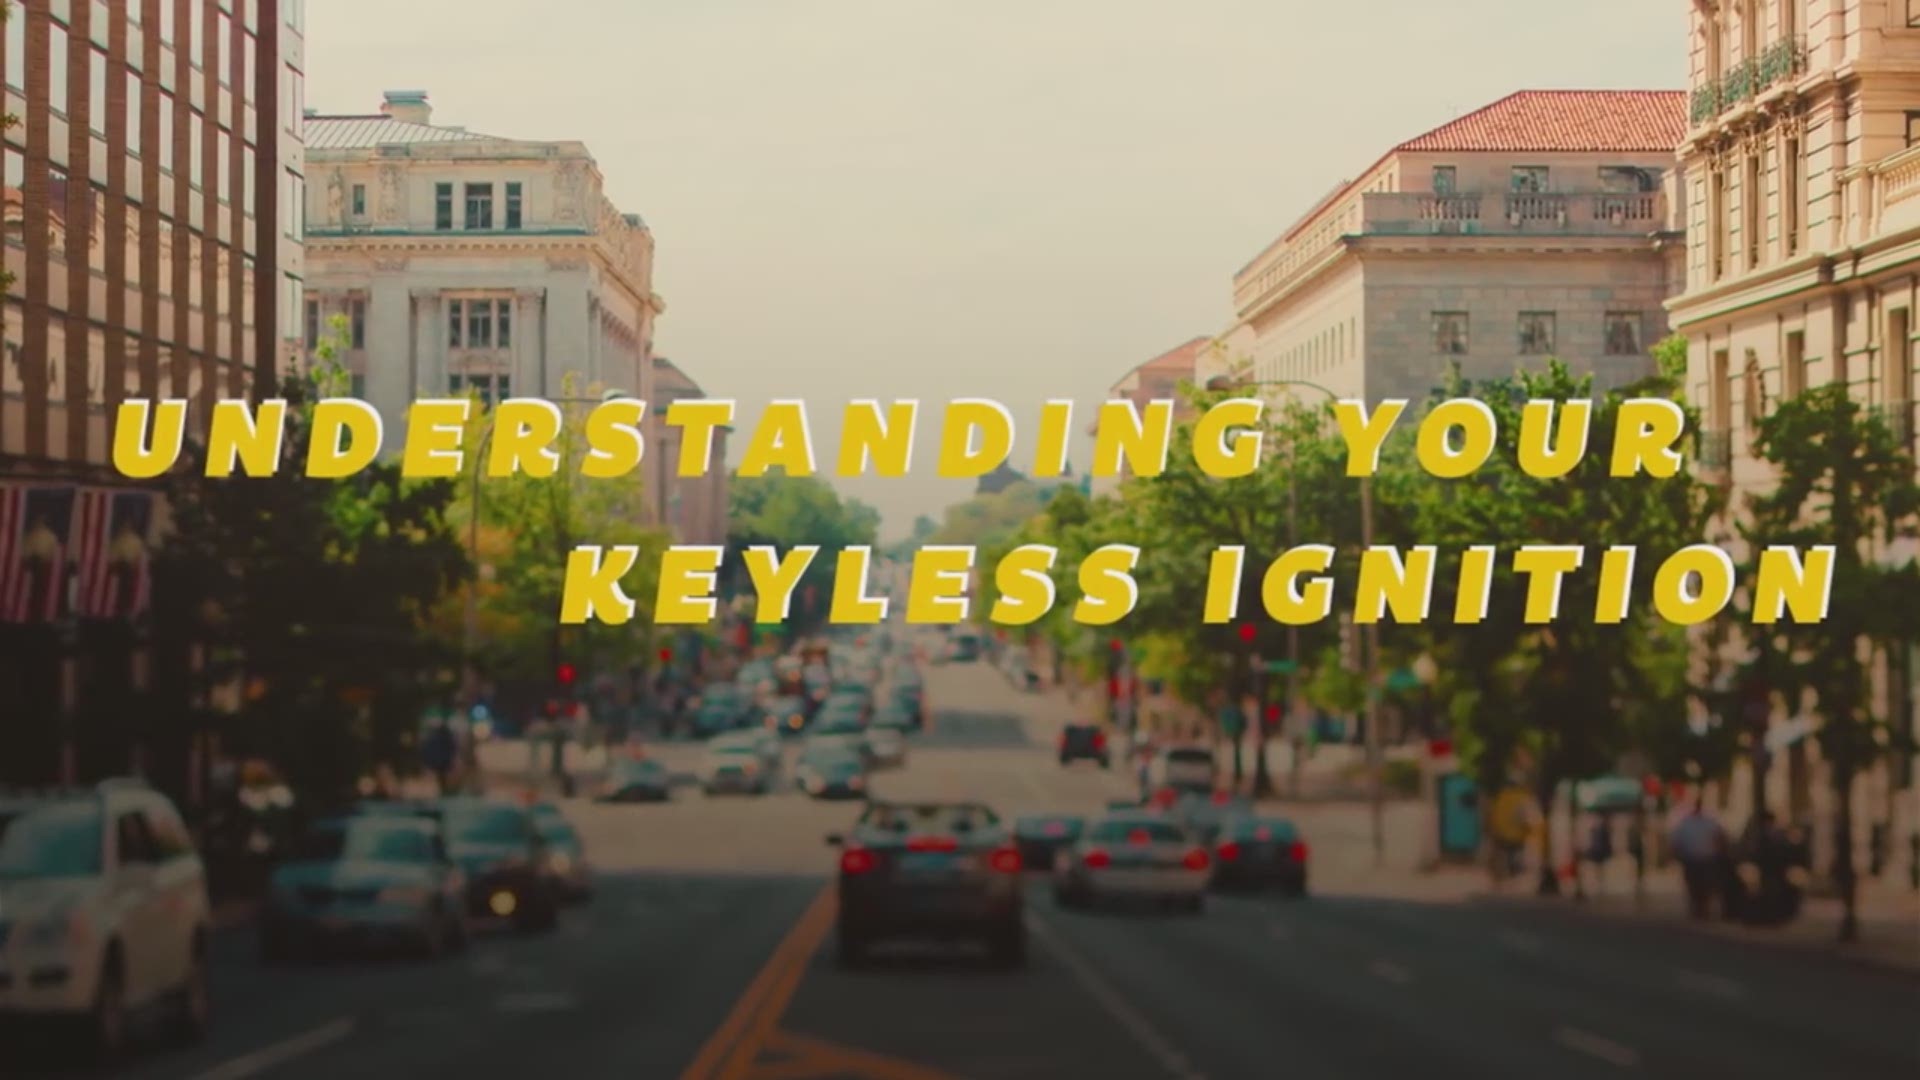 The National Highway Traffic Safety Administration put out this video about using keyless ignition safely.